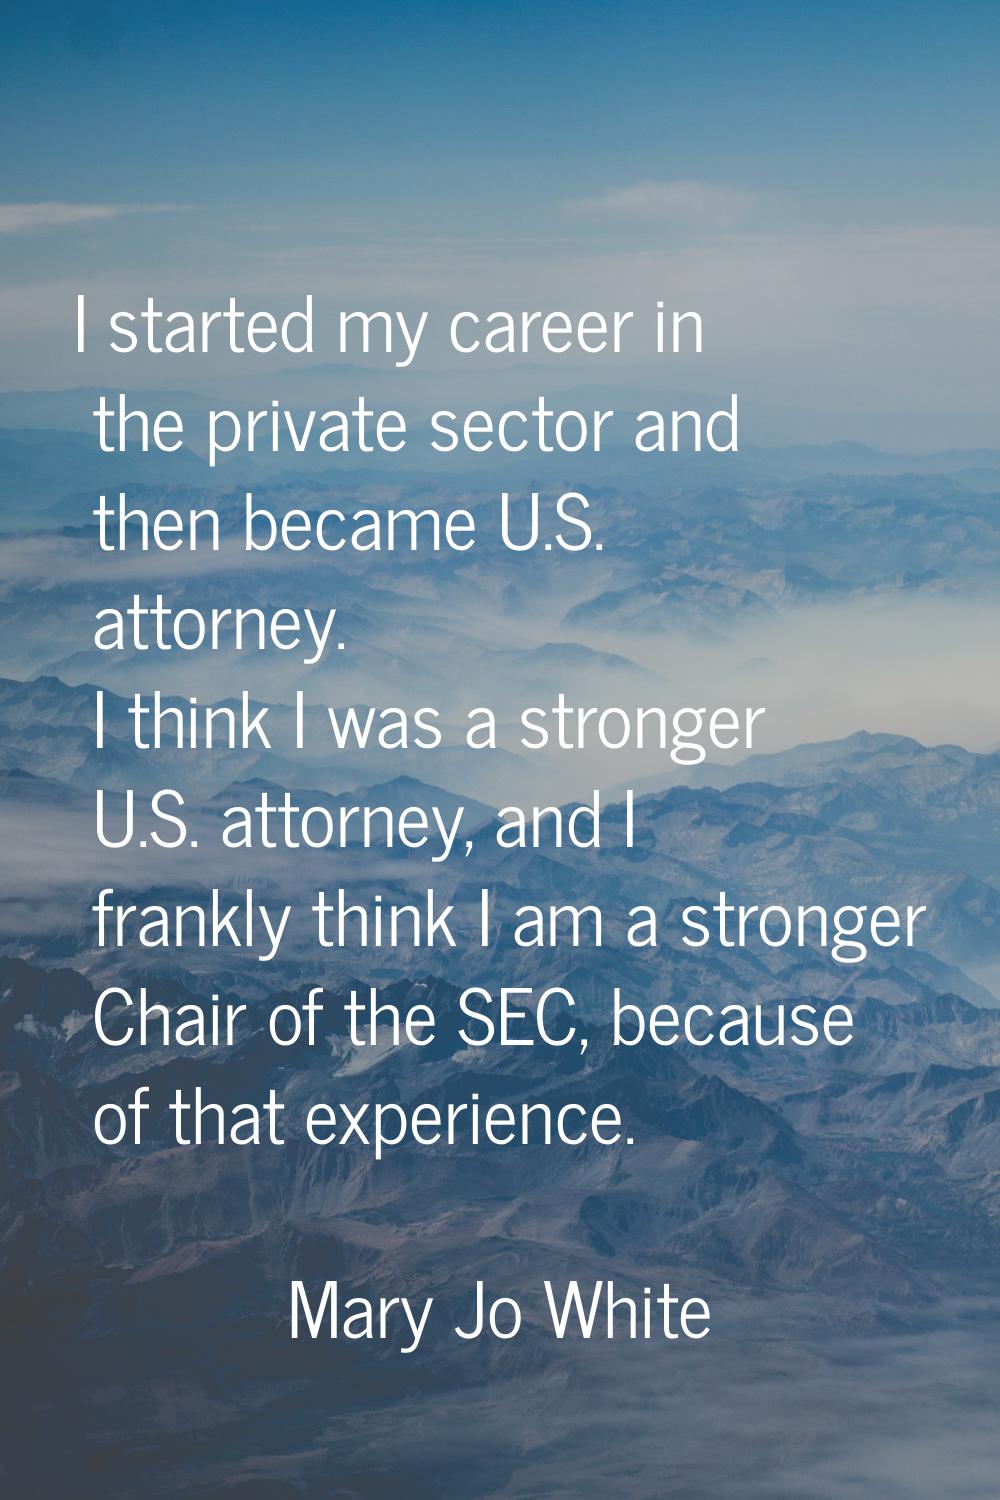 I started my career in the private sector and then became U.S. attorney. I think I was a stronger U